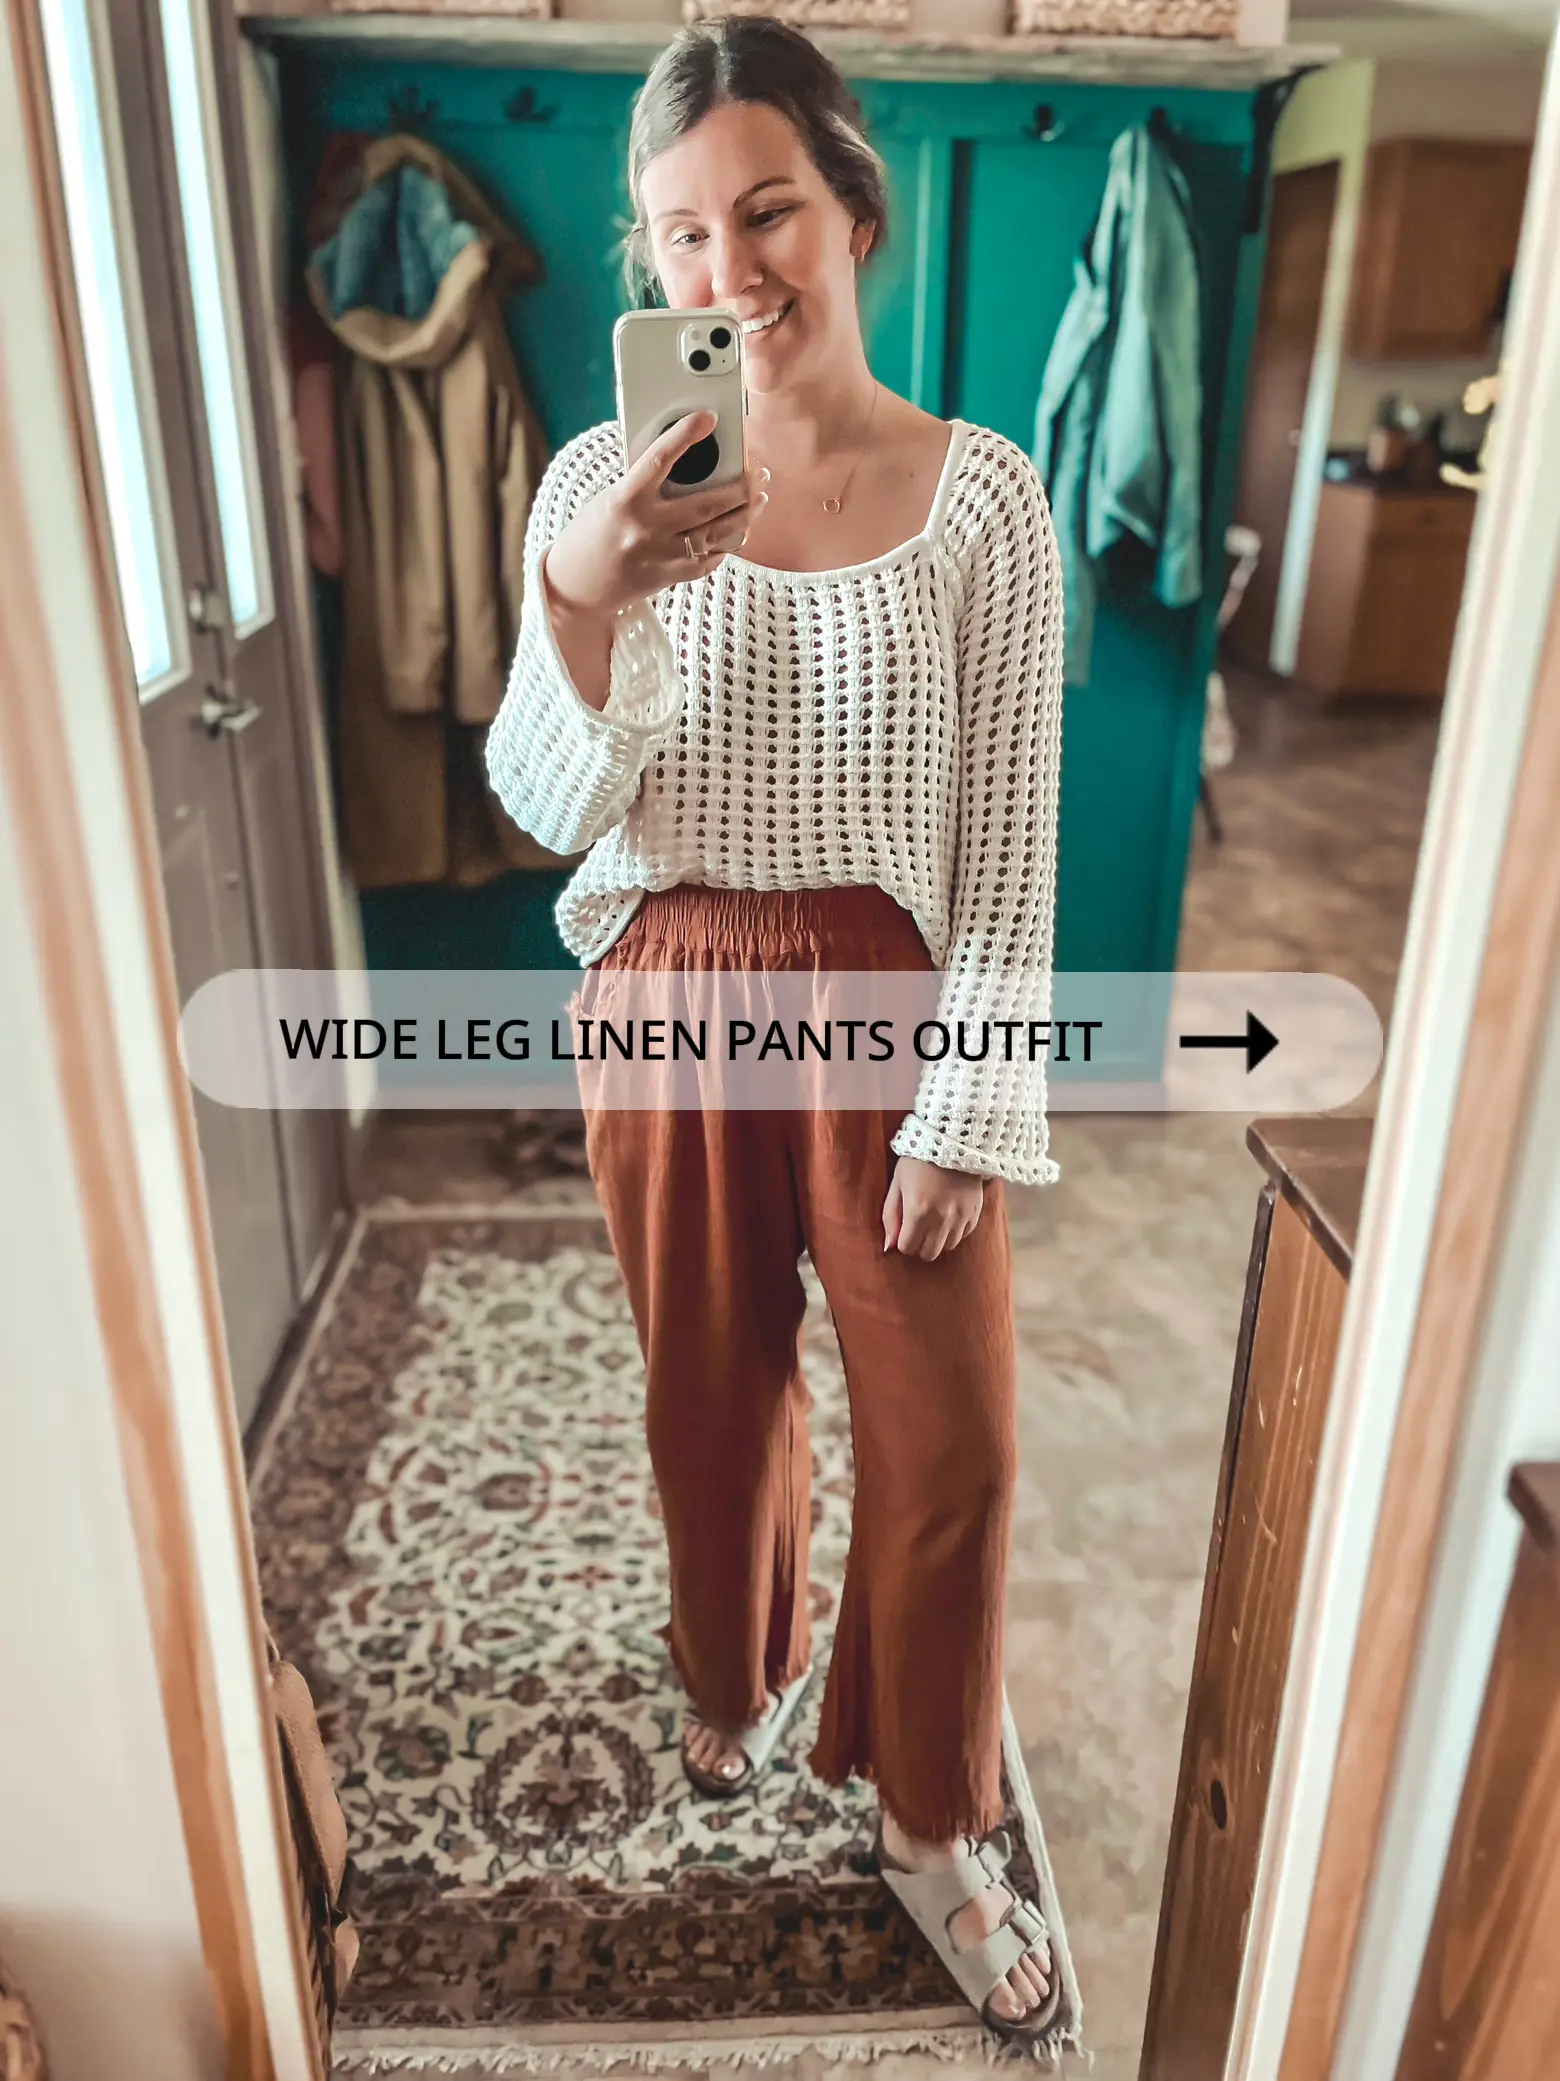 WIDE LEG LINEN PANTS OUTFIT  Gallery posted by MarissaNewvine